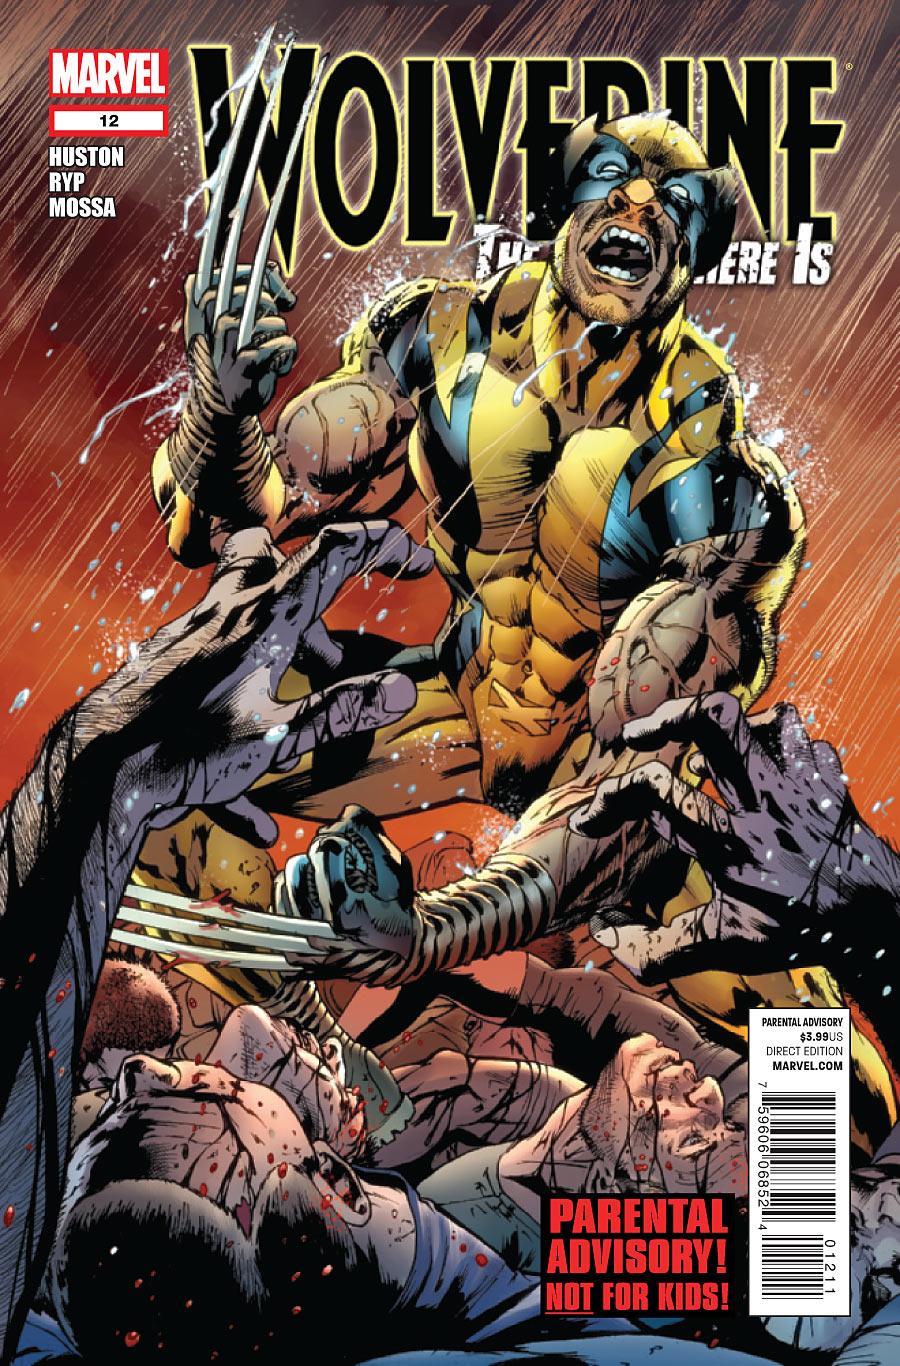 Wolverine: The Best There Is Vol. 1 #12